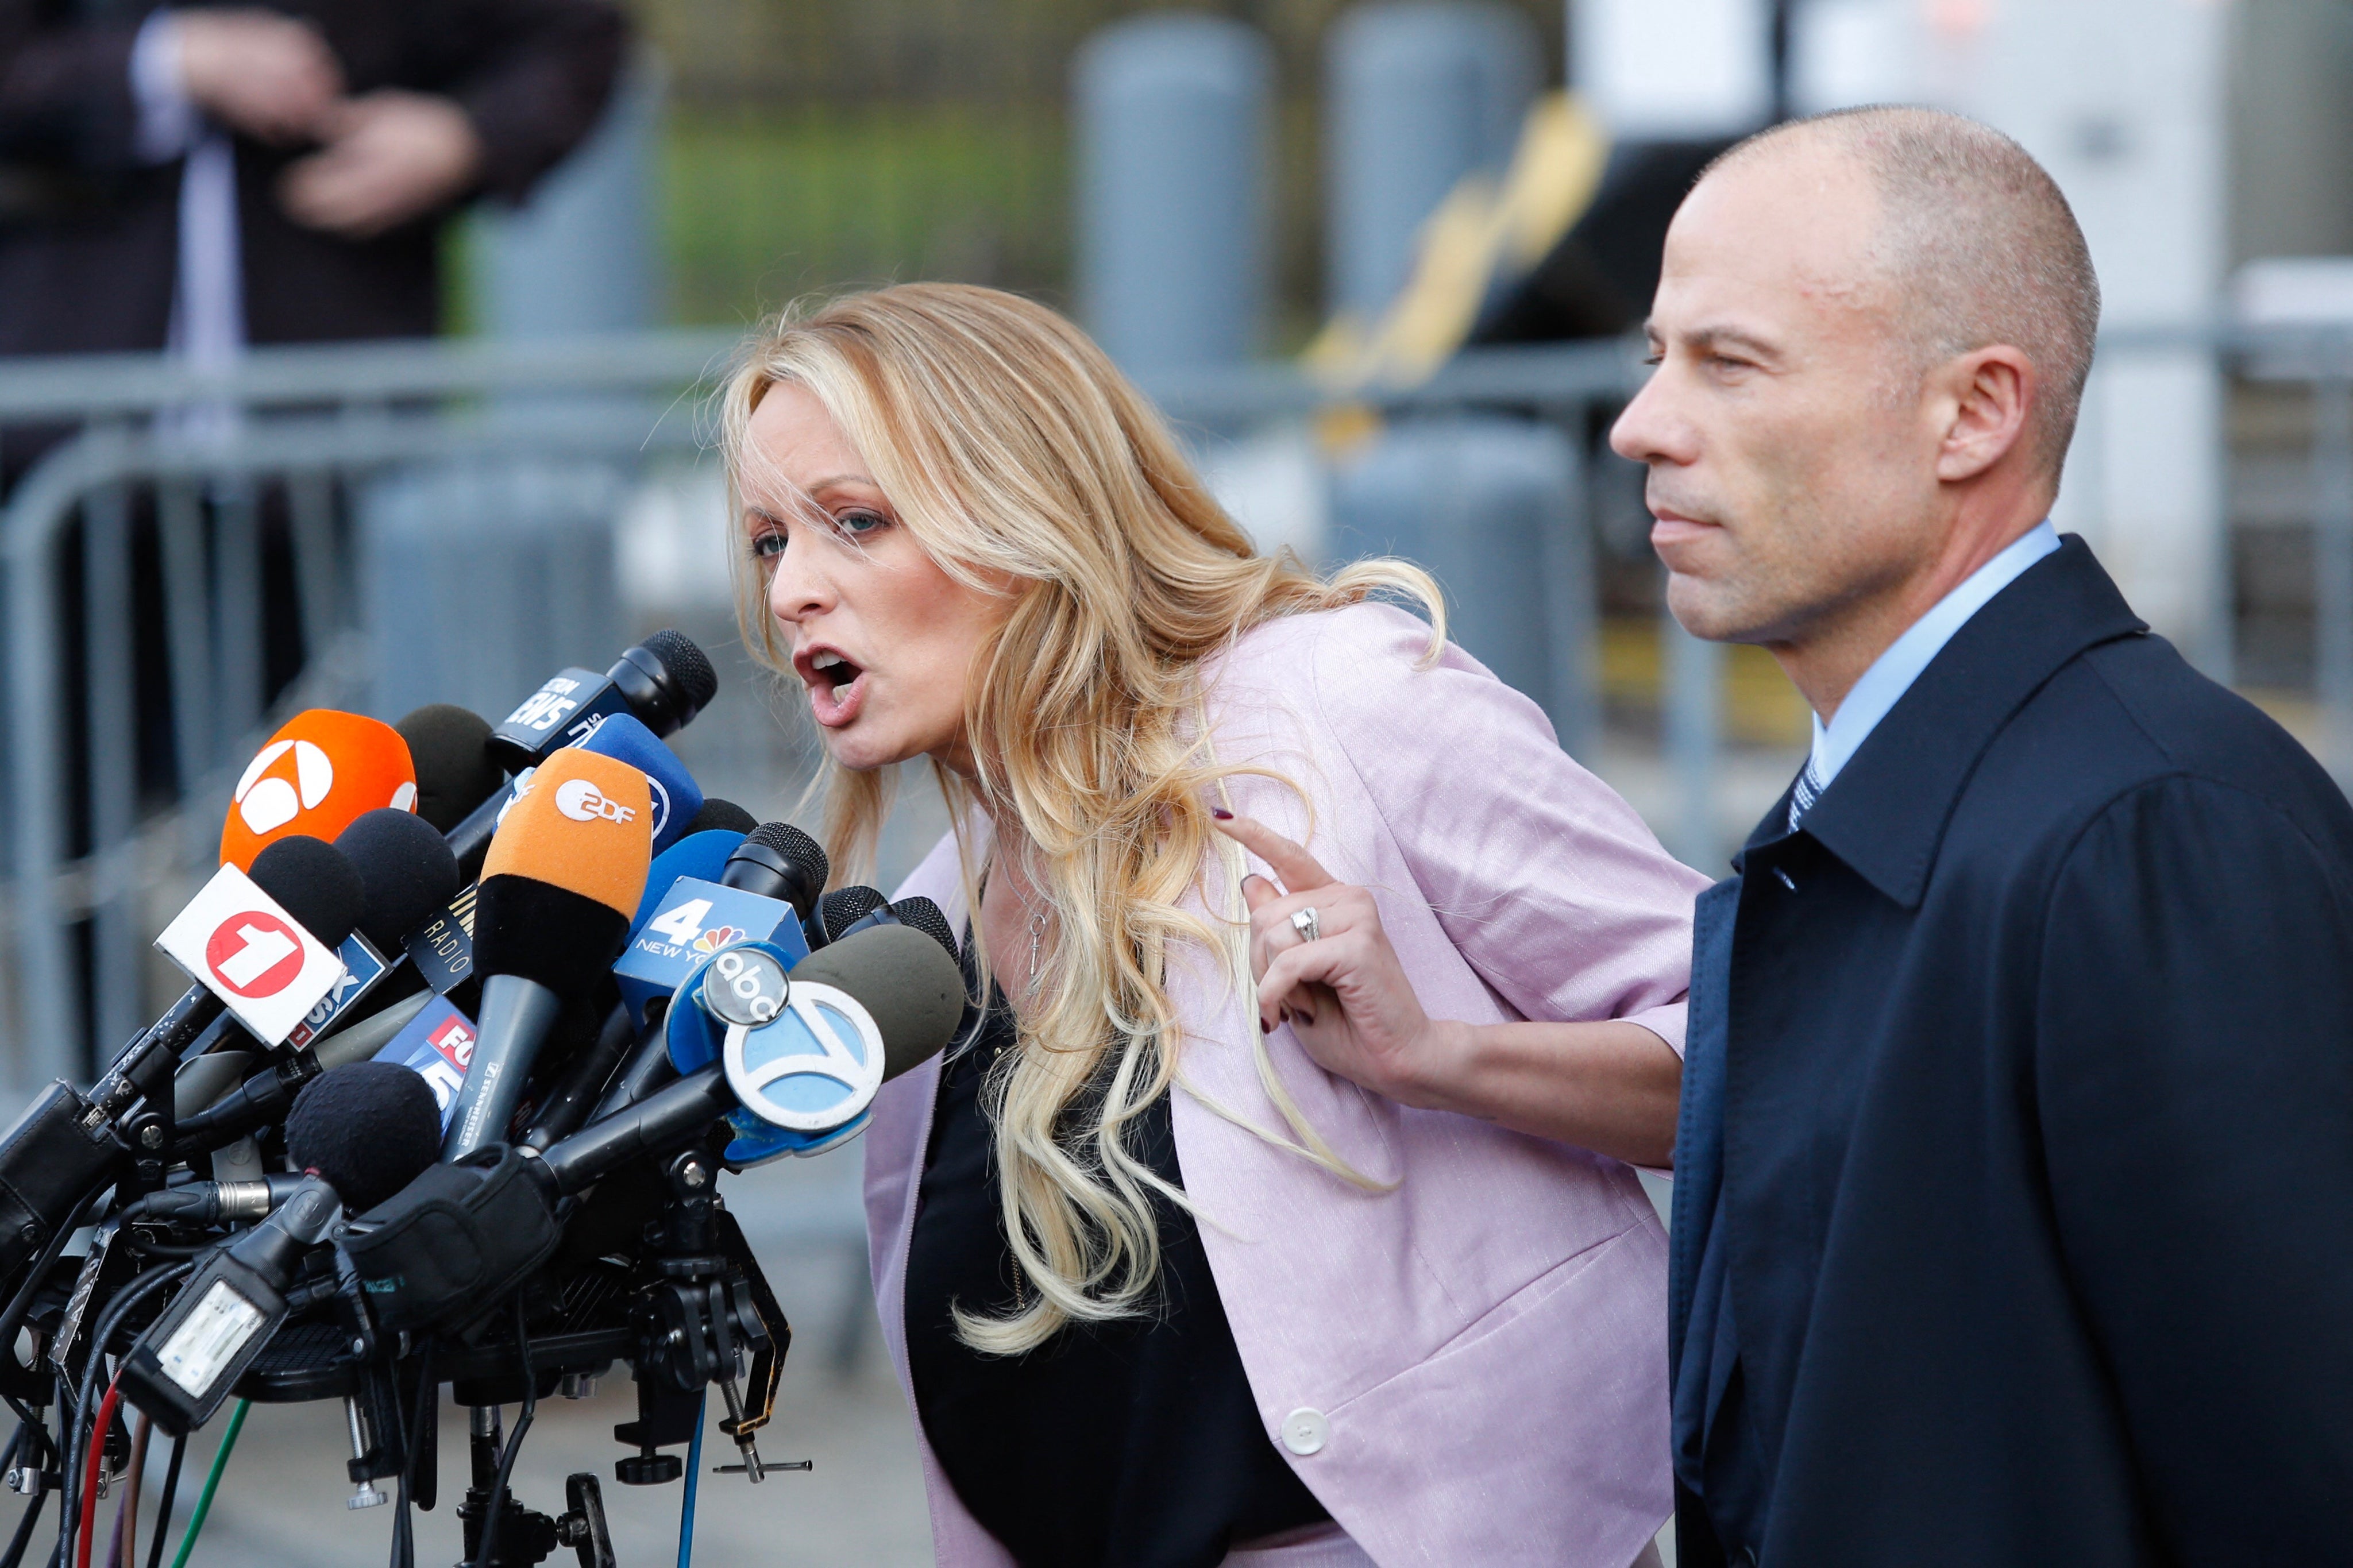 disgraced former stormy daniels lawyer says he would now testify for trump